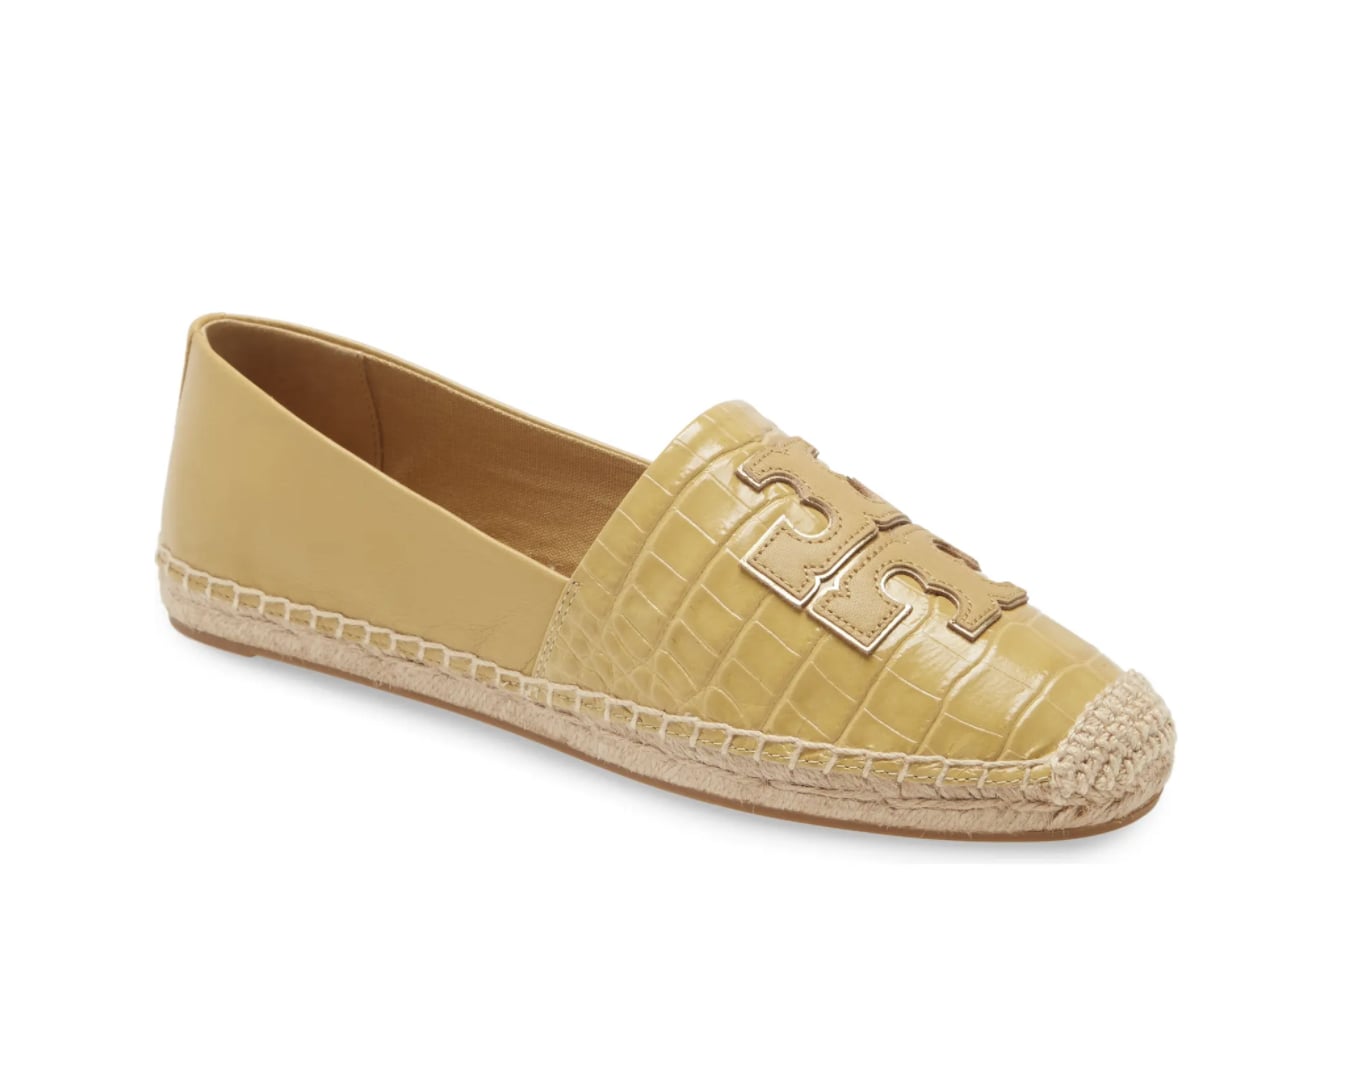 Tory Burch Ines Espadrille | 15 Easy-to-Style Espadrilles You'll 